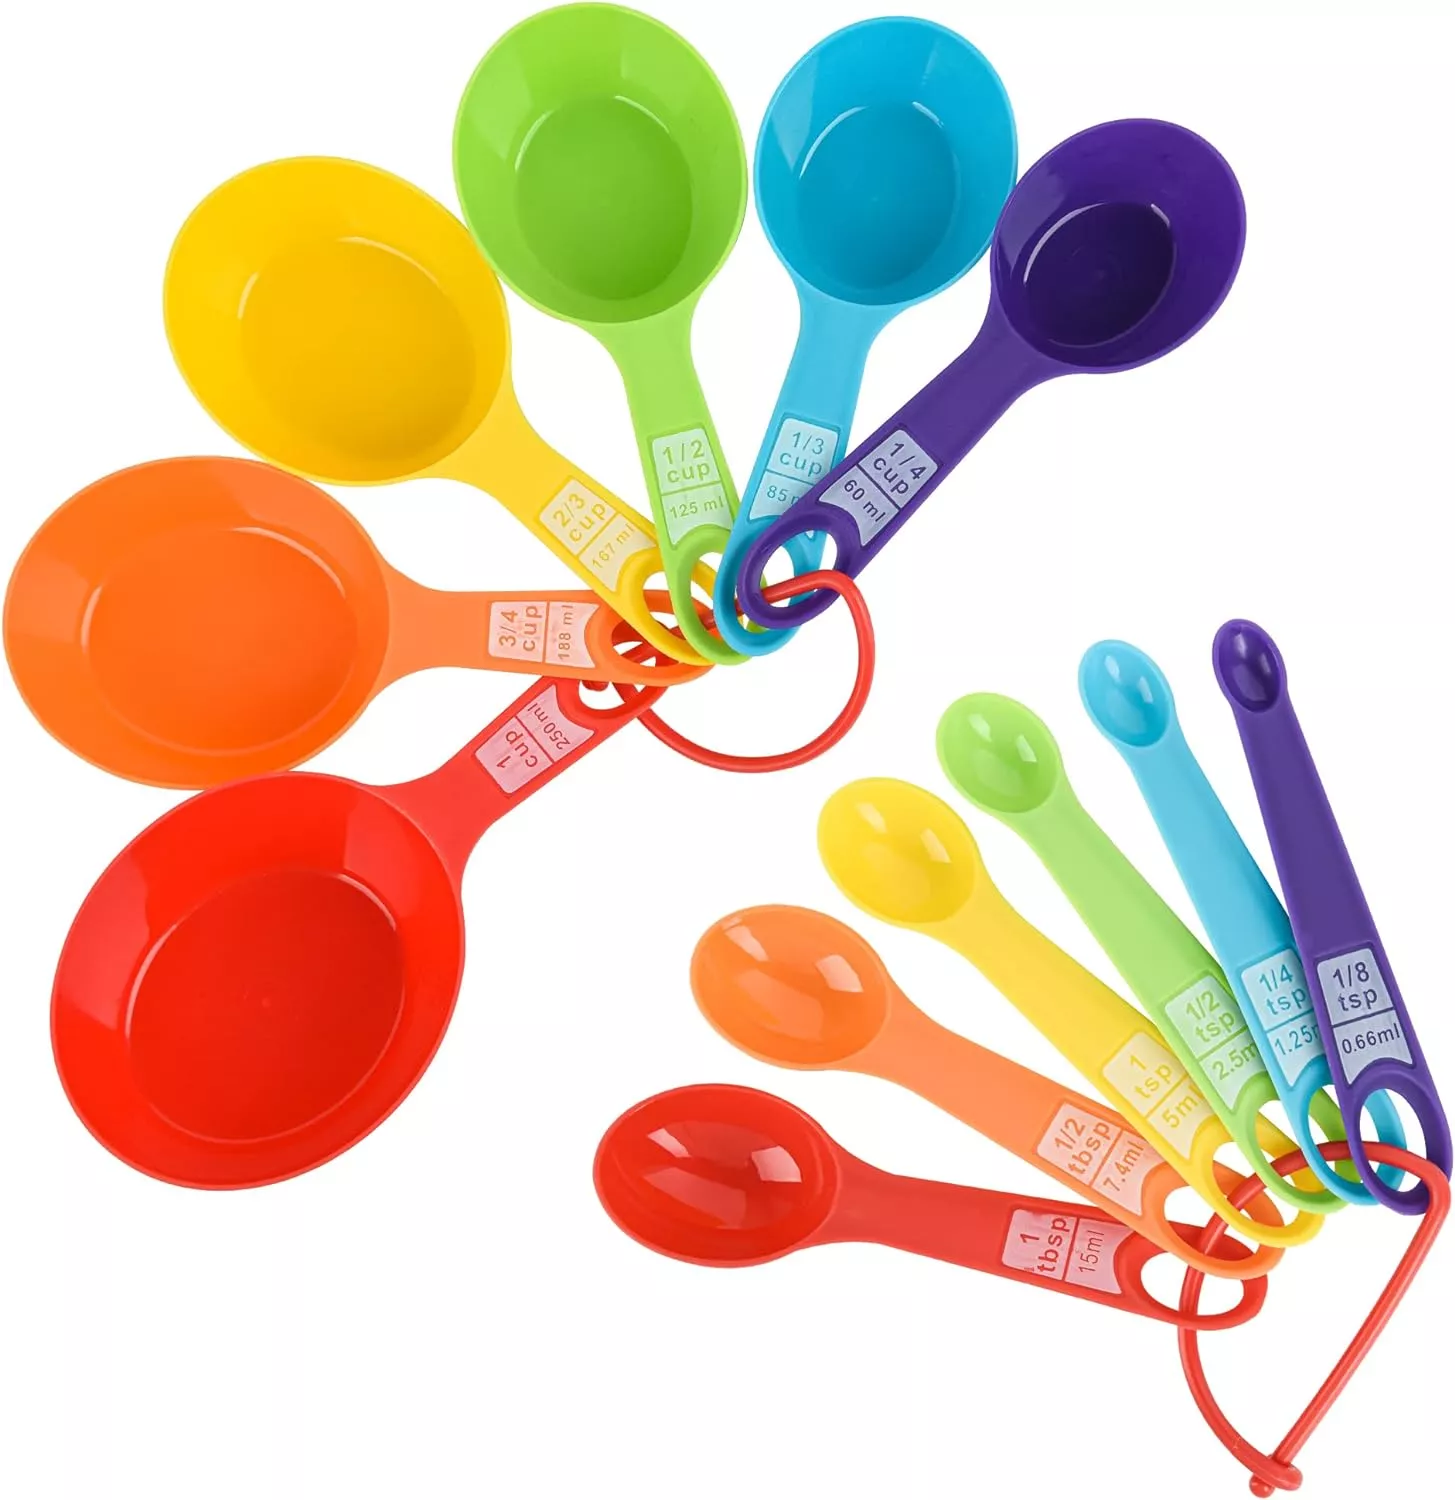  Smithcraft Measuring Cups and Spoons Set, Silicone